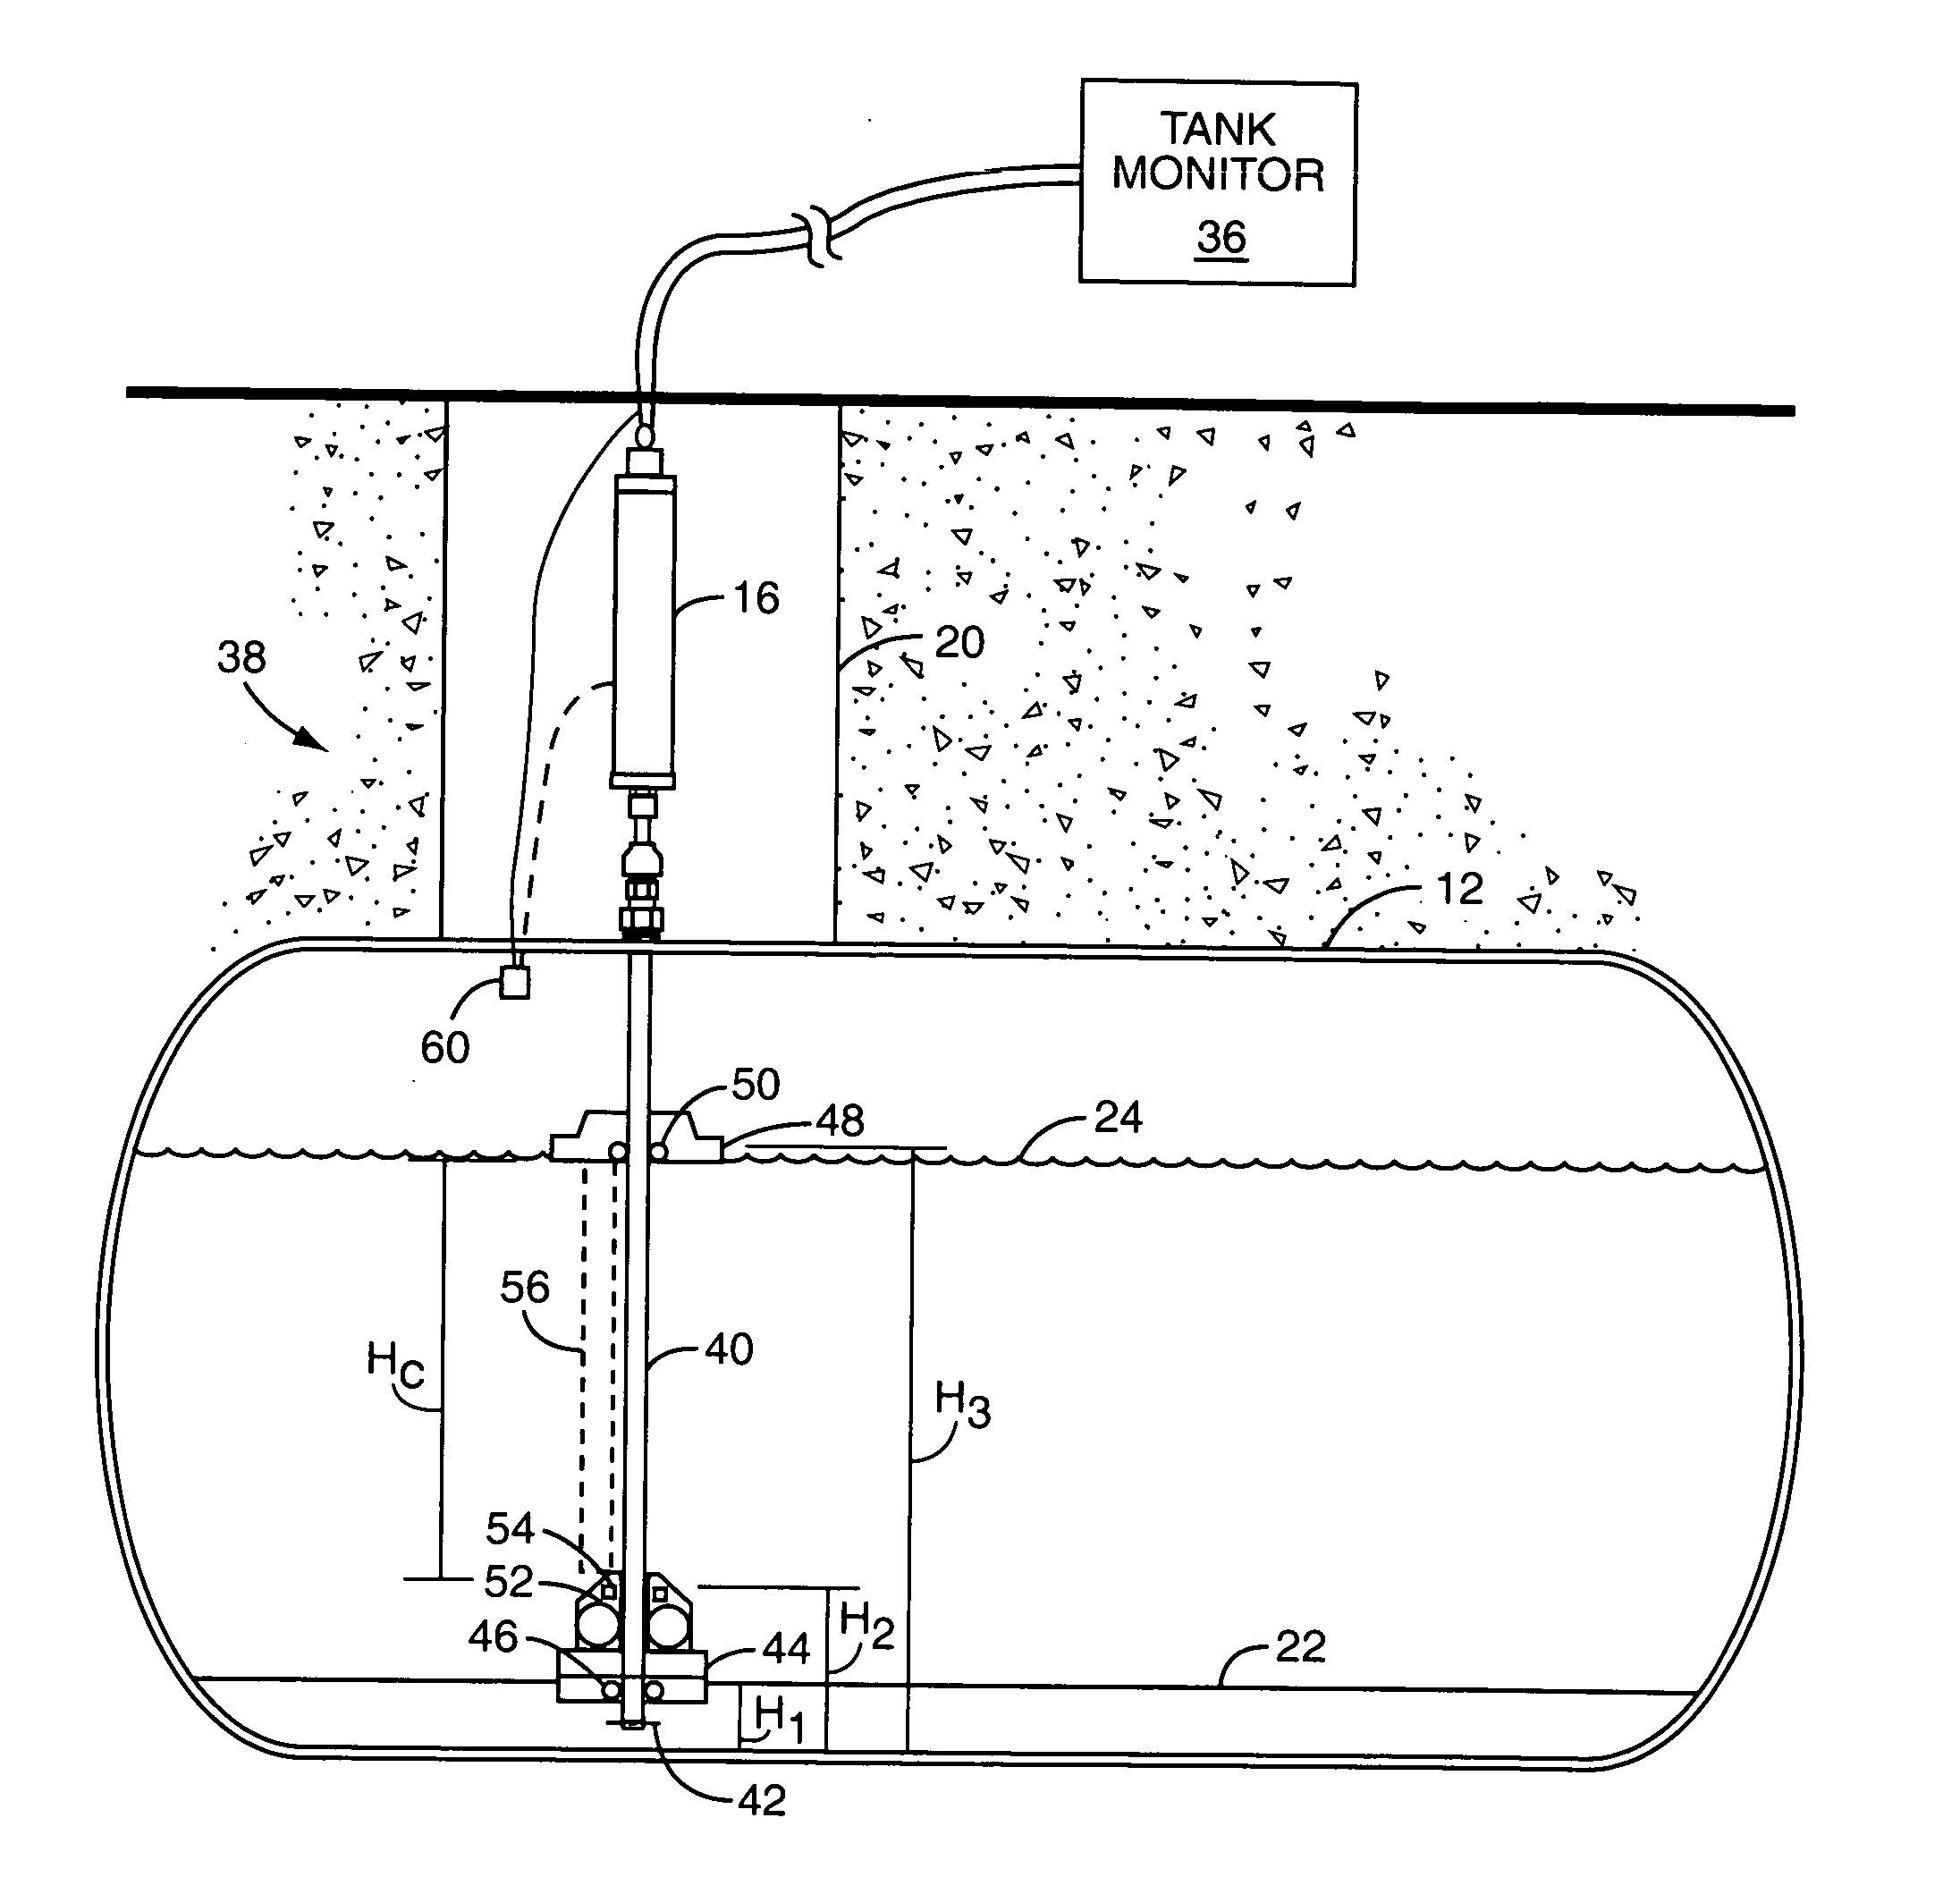 Fuel density measurement device, system, and method